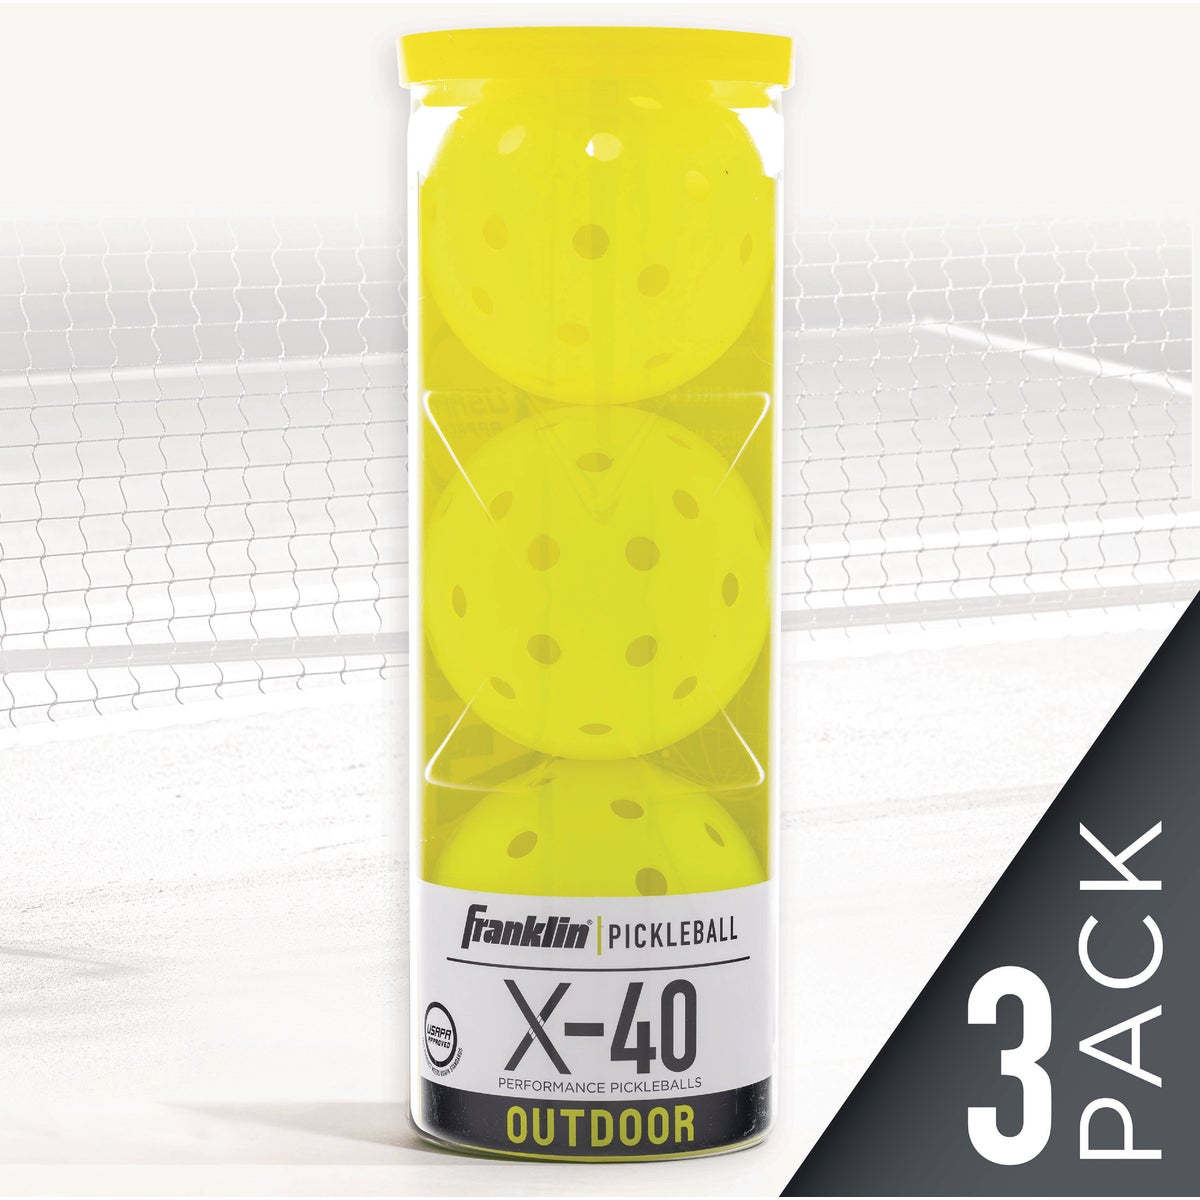 Franklin X-40 Optic USAPA Approved Outdoor Pickleball (3-Pack)